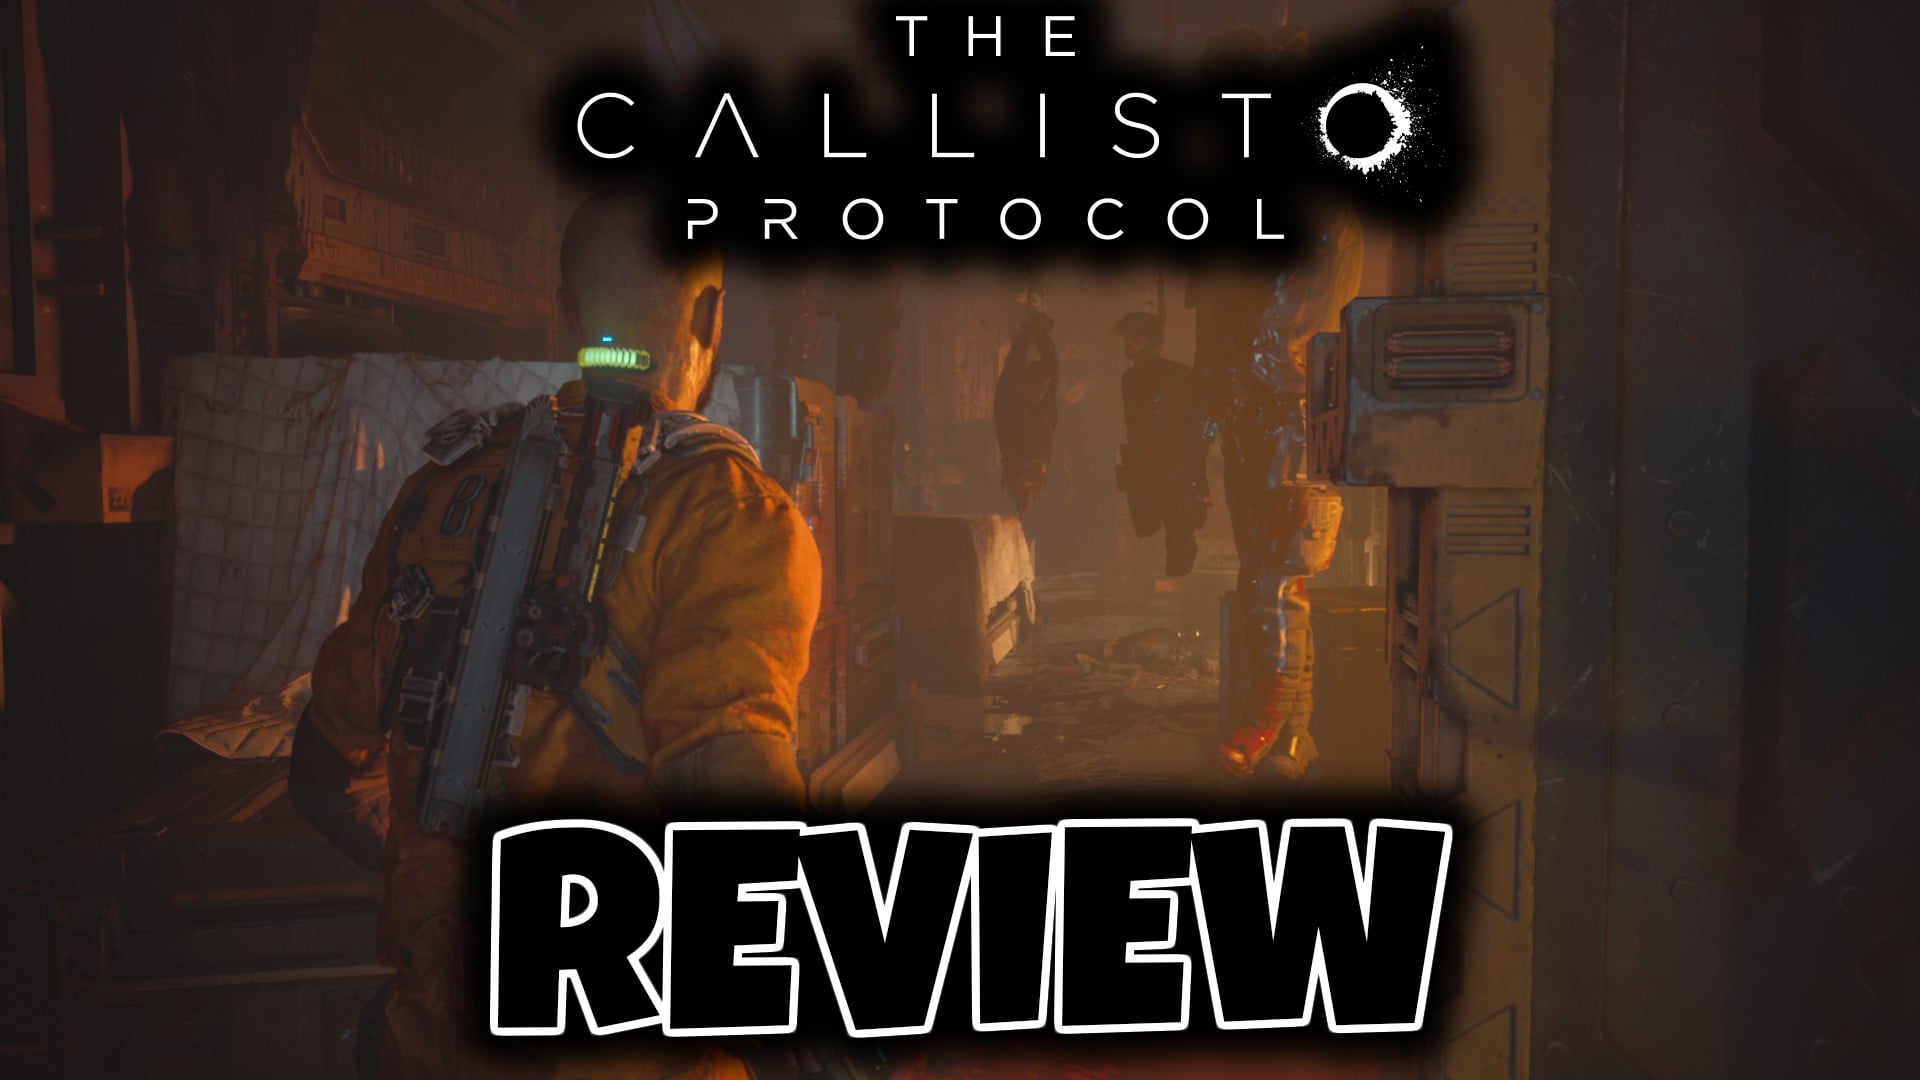 Why are Callisto Protocol's reviews so low?